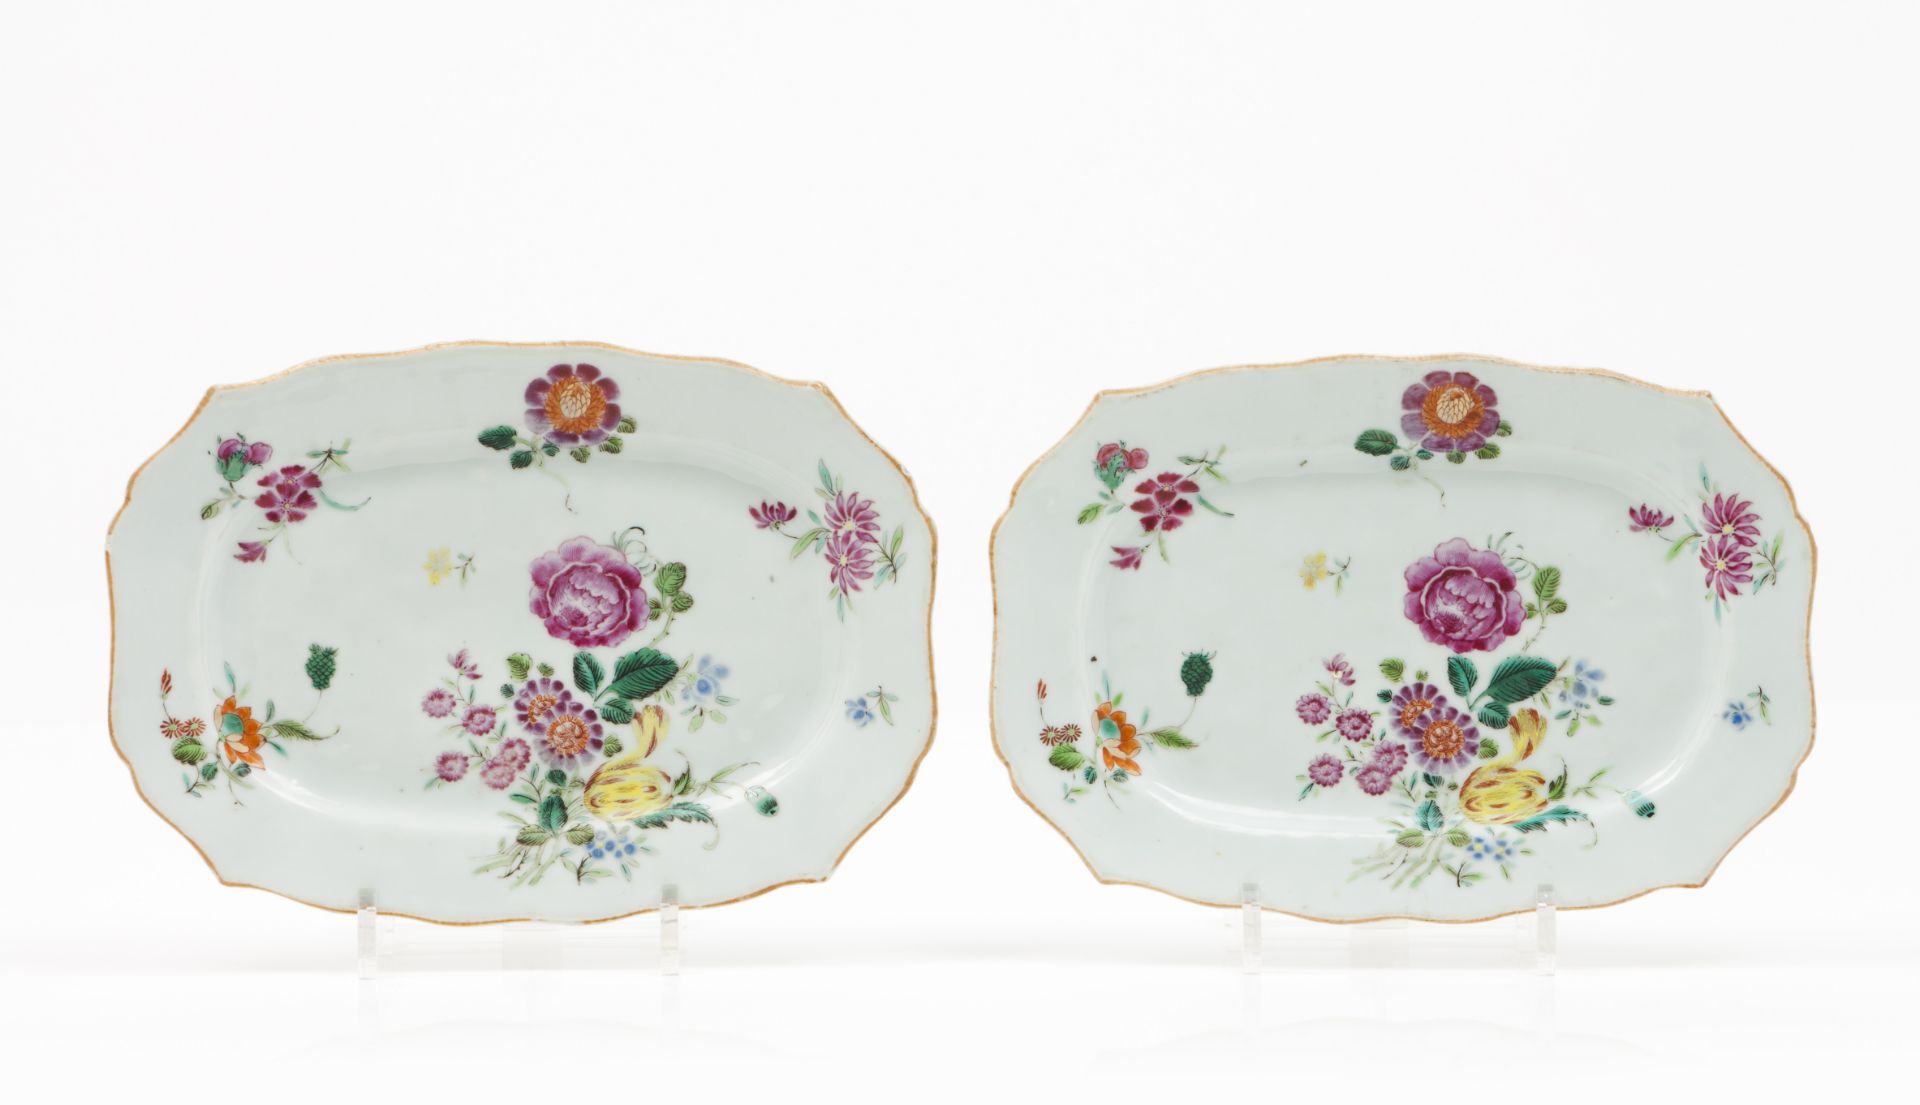 A pair of scalloped serving trays